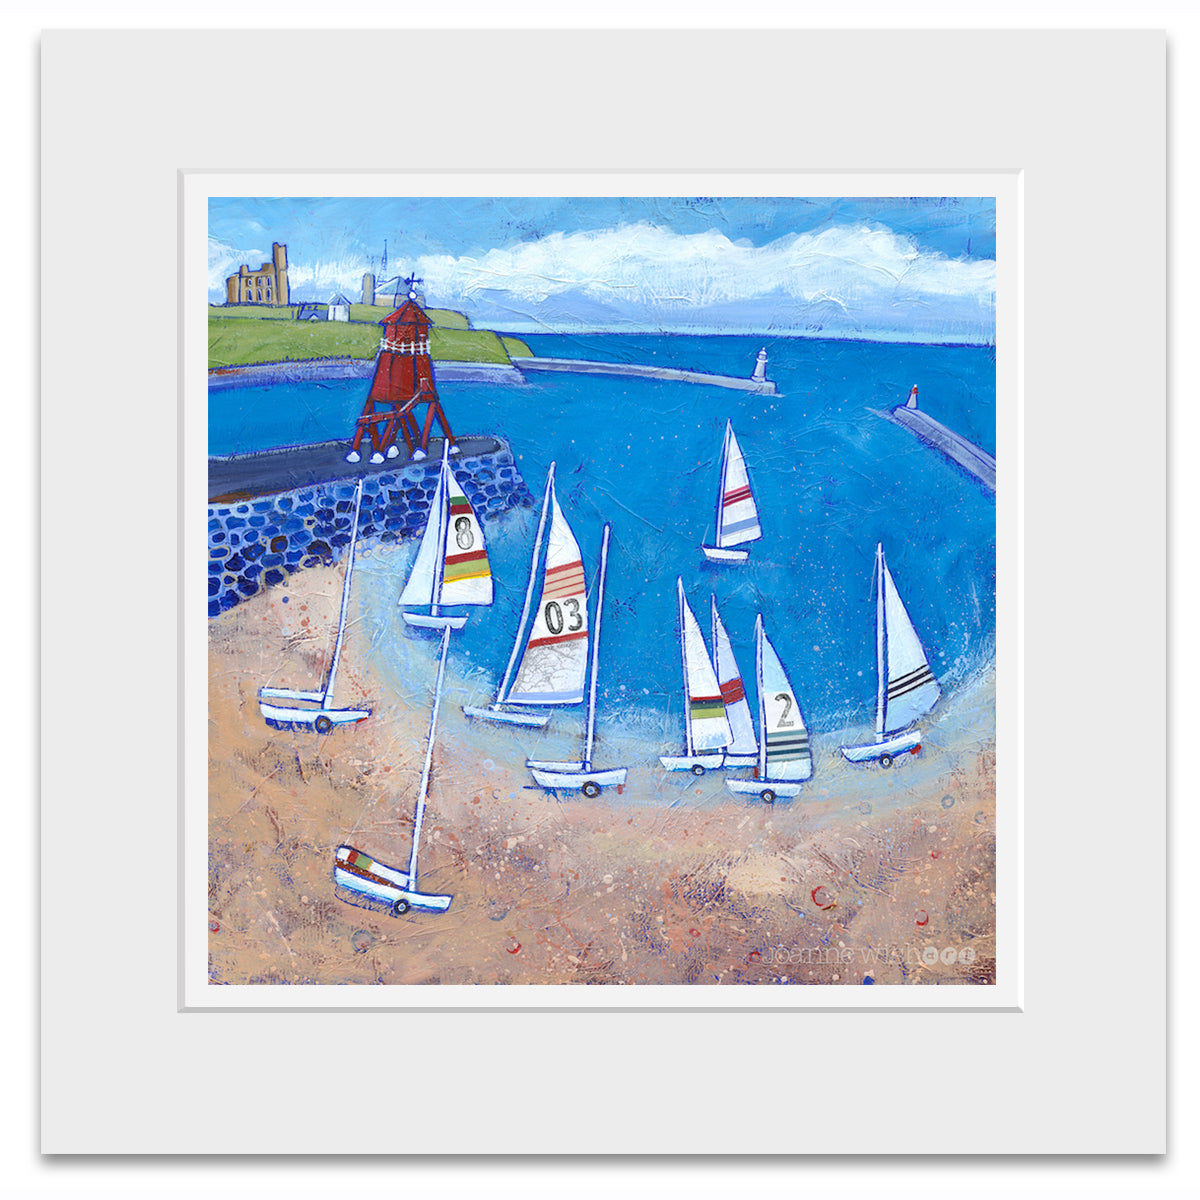 A mounted print of South Shields groyne with sailing boats in the bay and Tynemouth Priory in the distance.